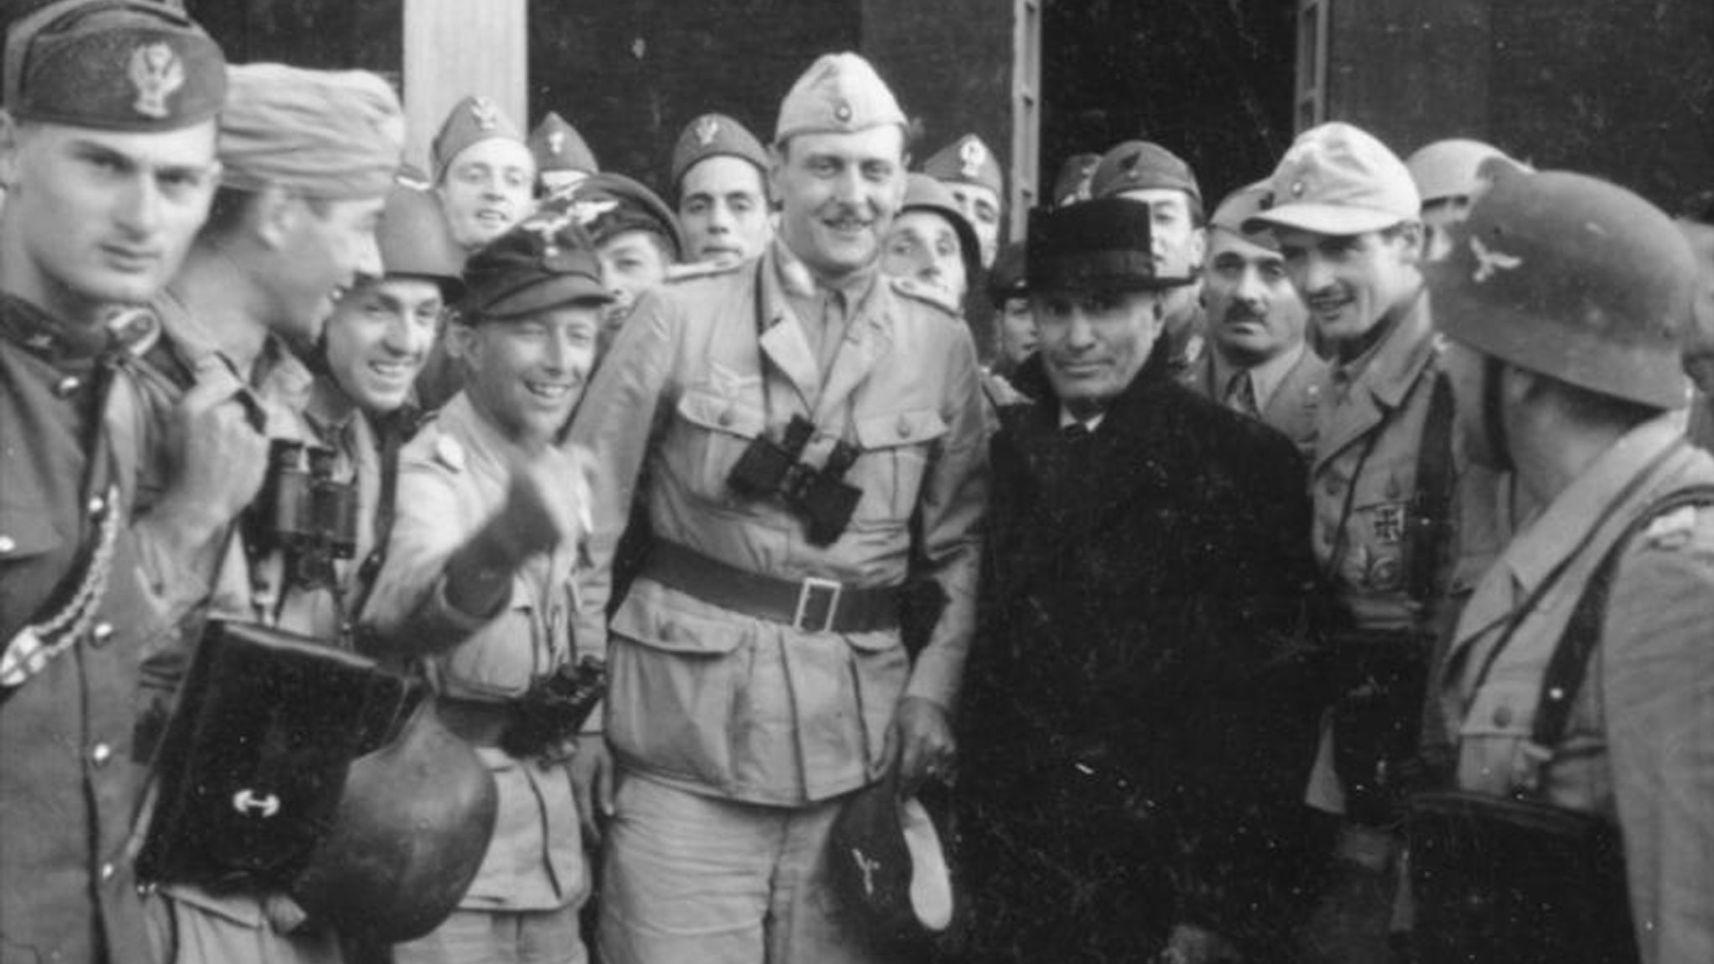 Otto Skorzeny after freeing Mussolini (in black) – 12th September, 1943